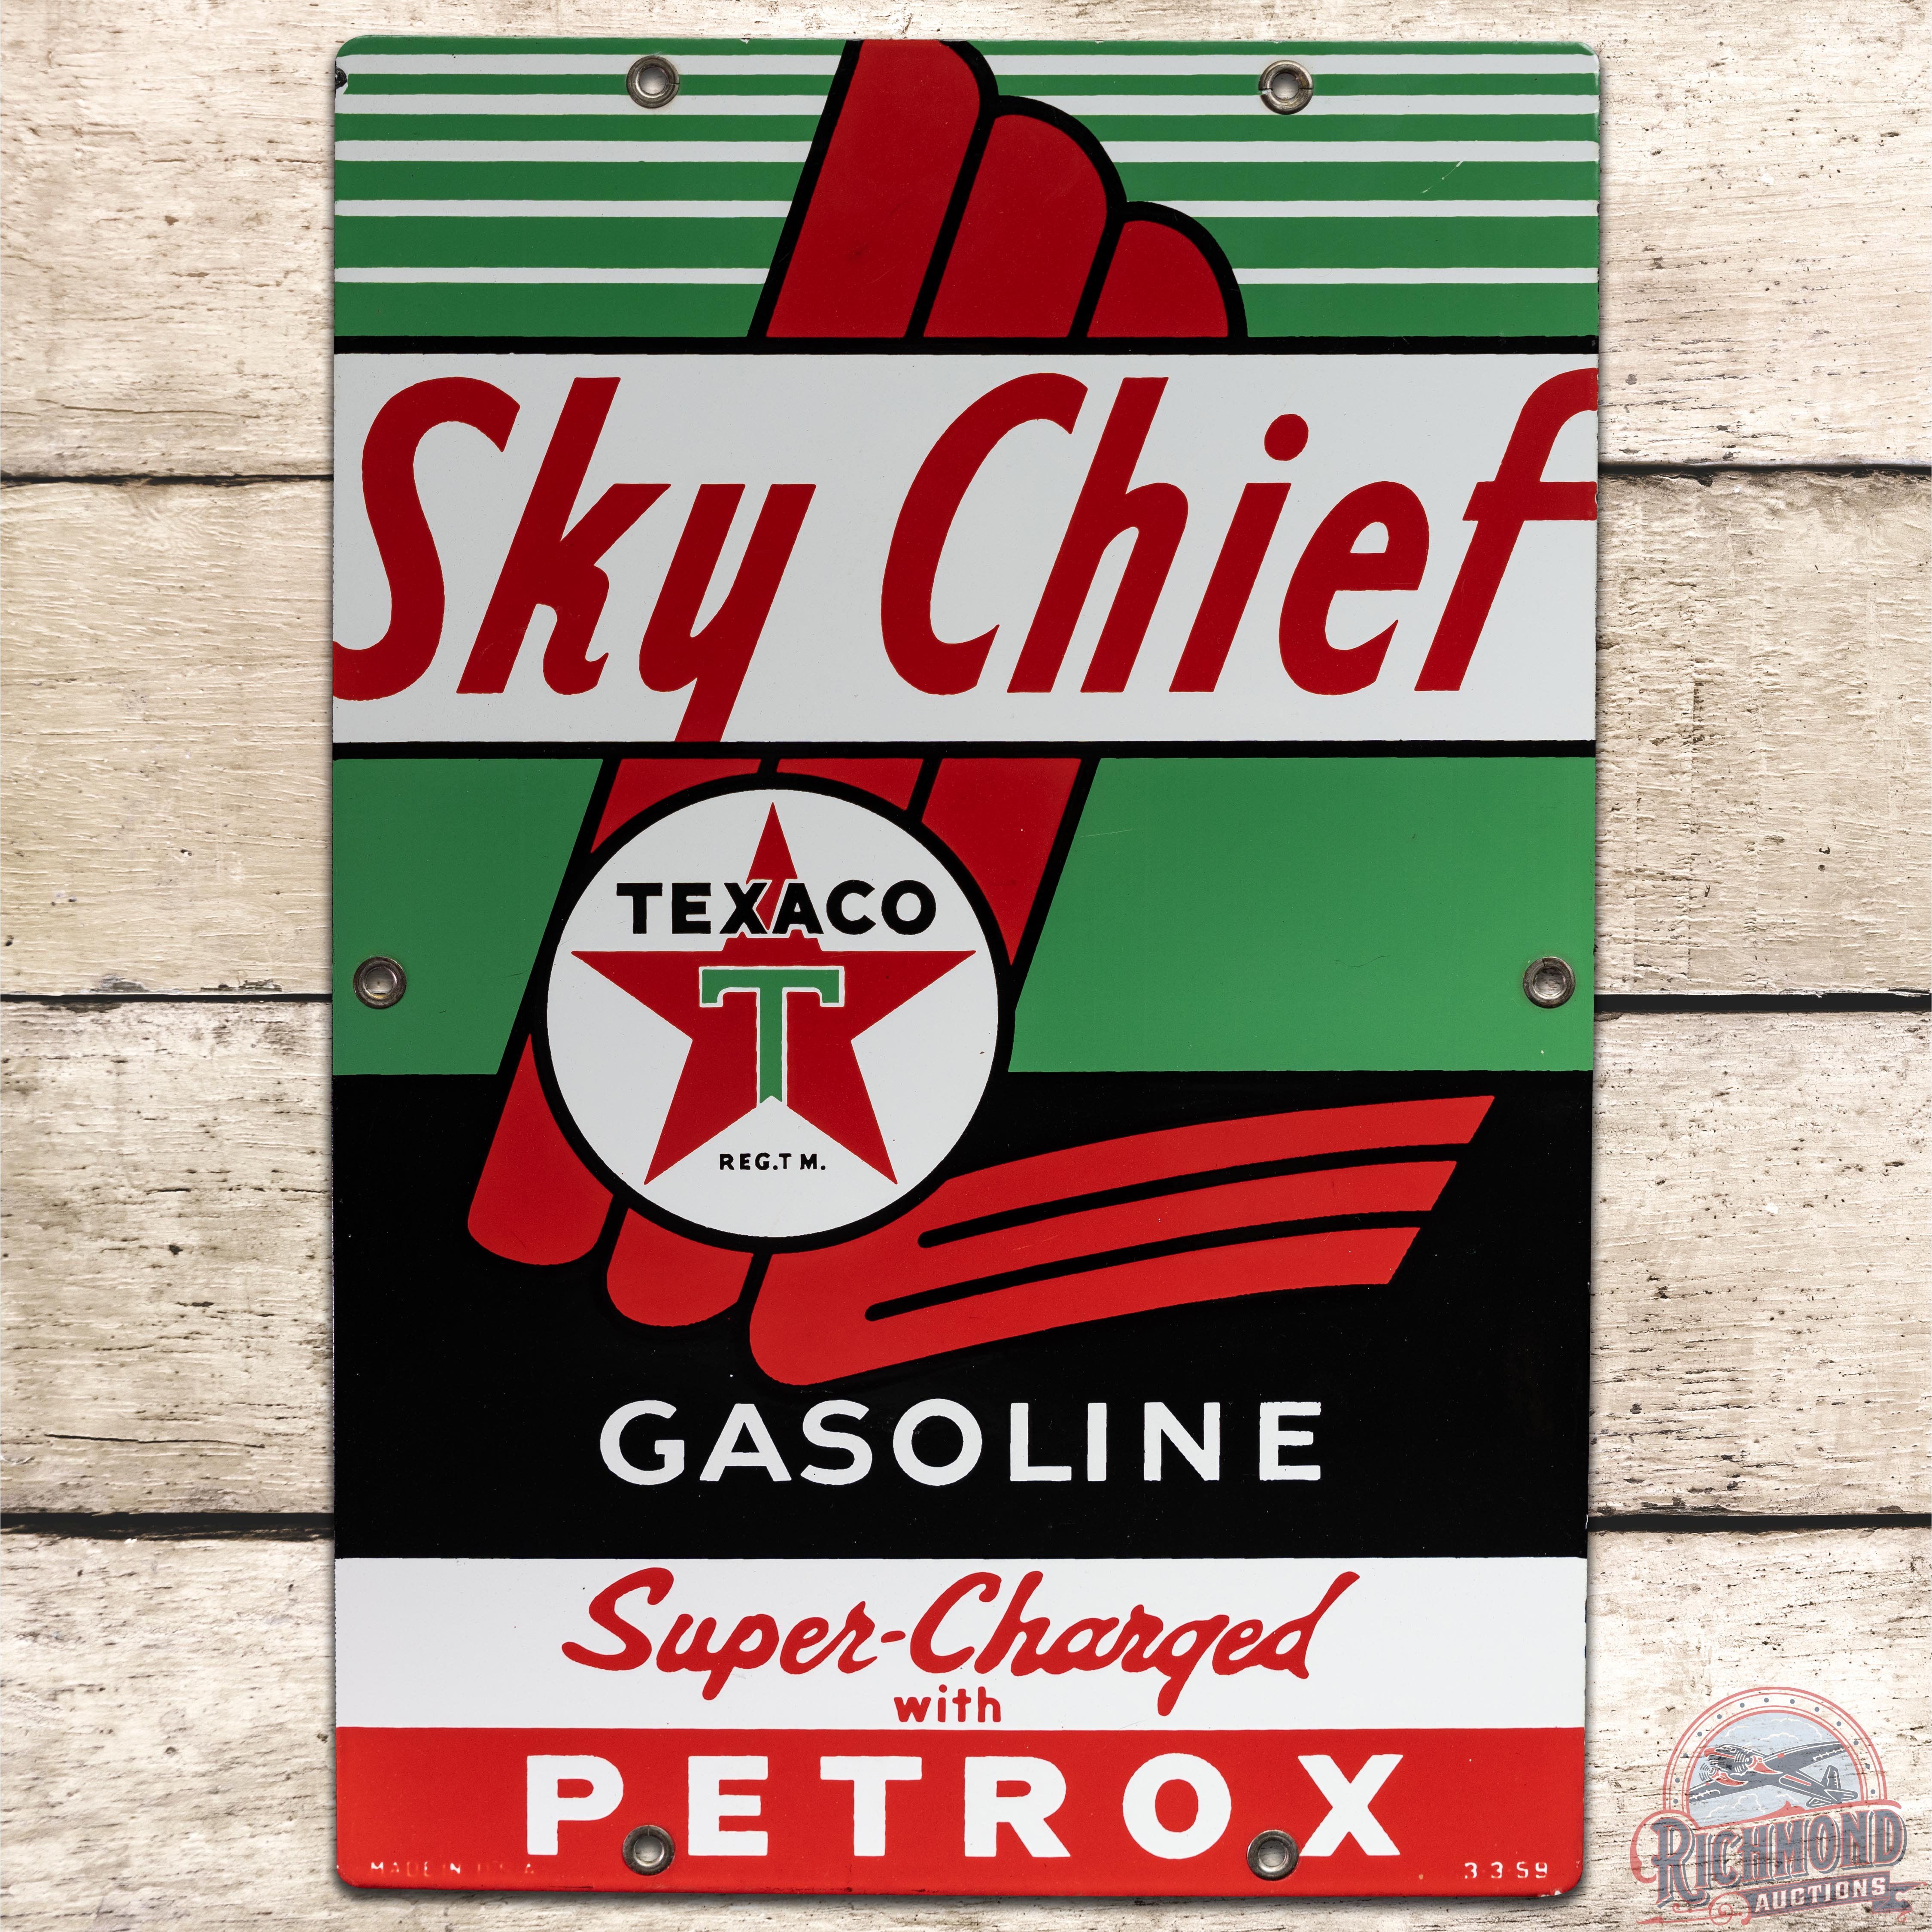 Texaco Sky Chief Gasoline Super-Charged w/ Petrox SSP Pump Plate 